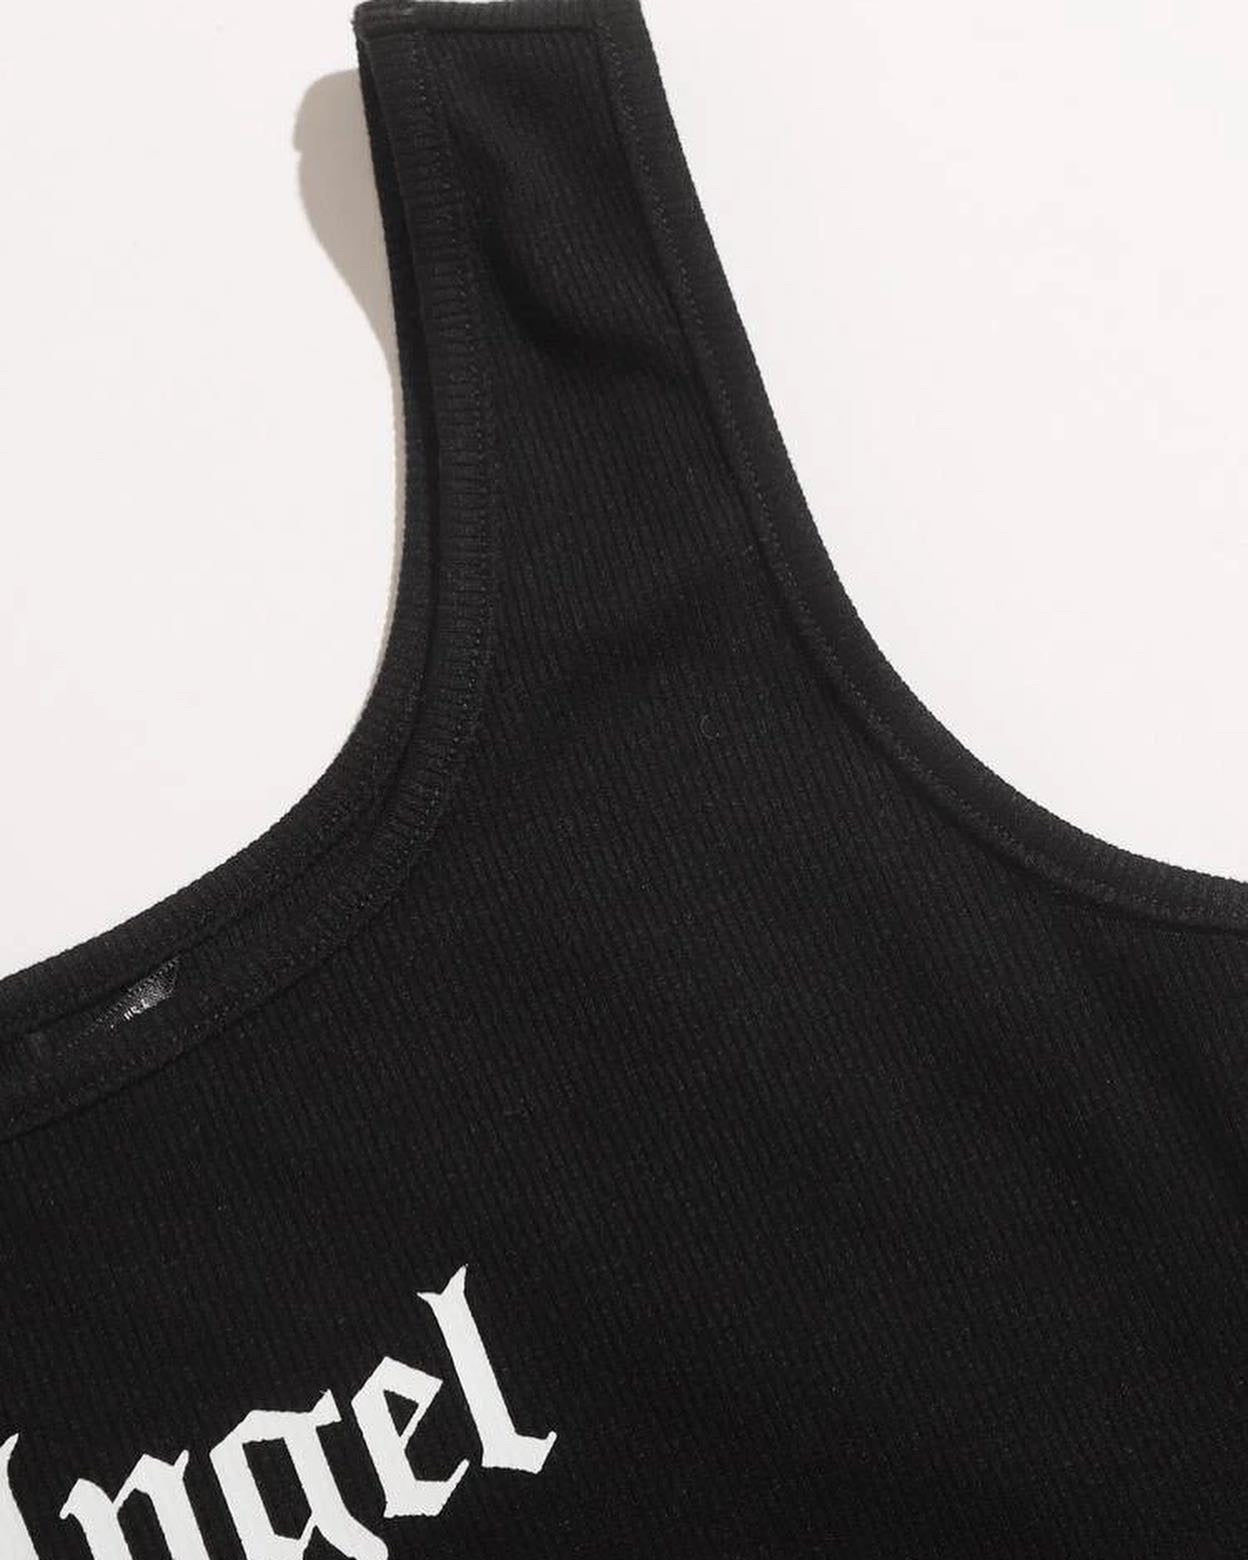 Teen Solid Black Graphic Rib Fitted Tank Top